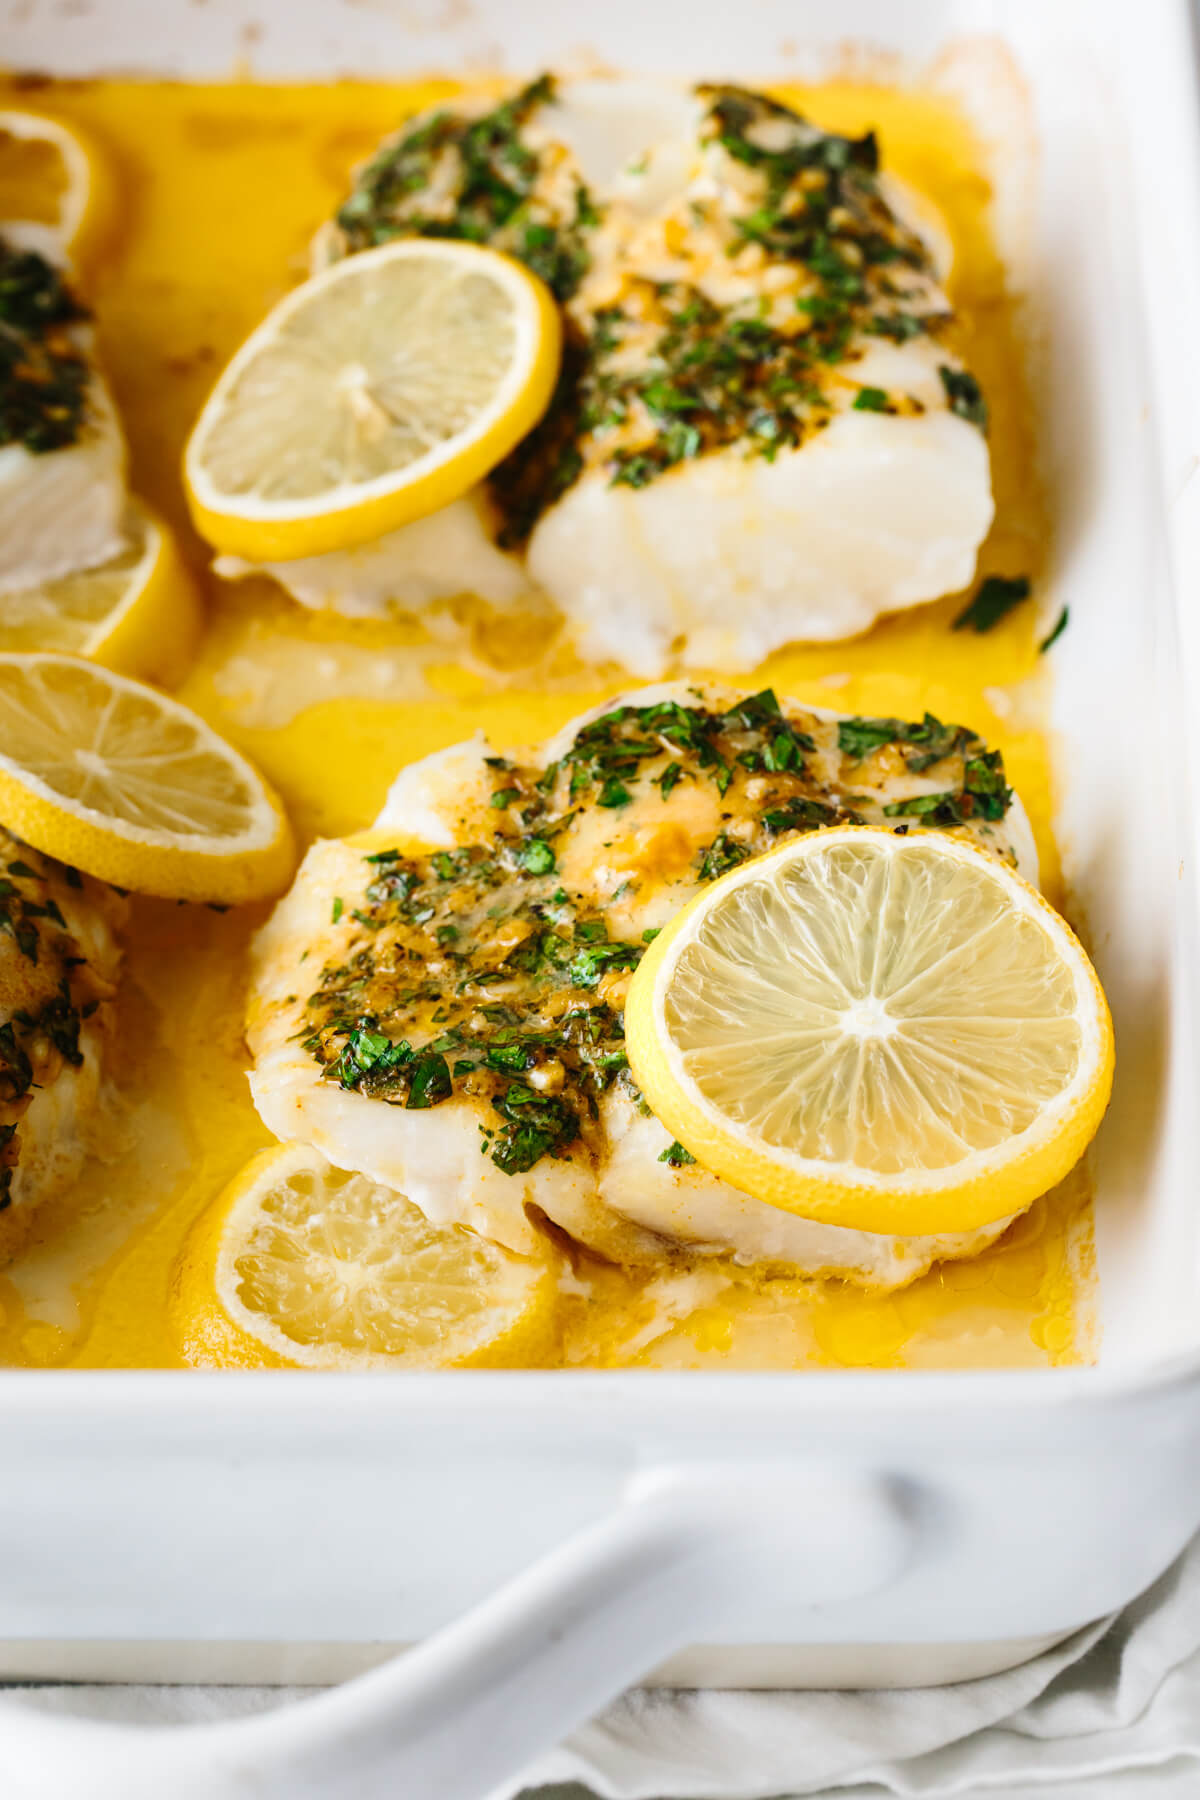 Piece of baked cod with lemon slice in a baking dish.